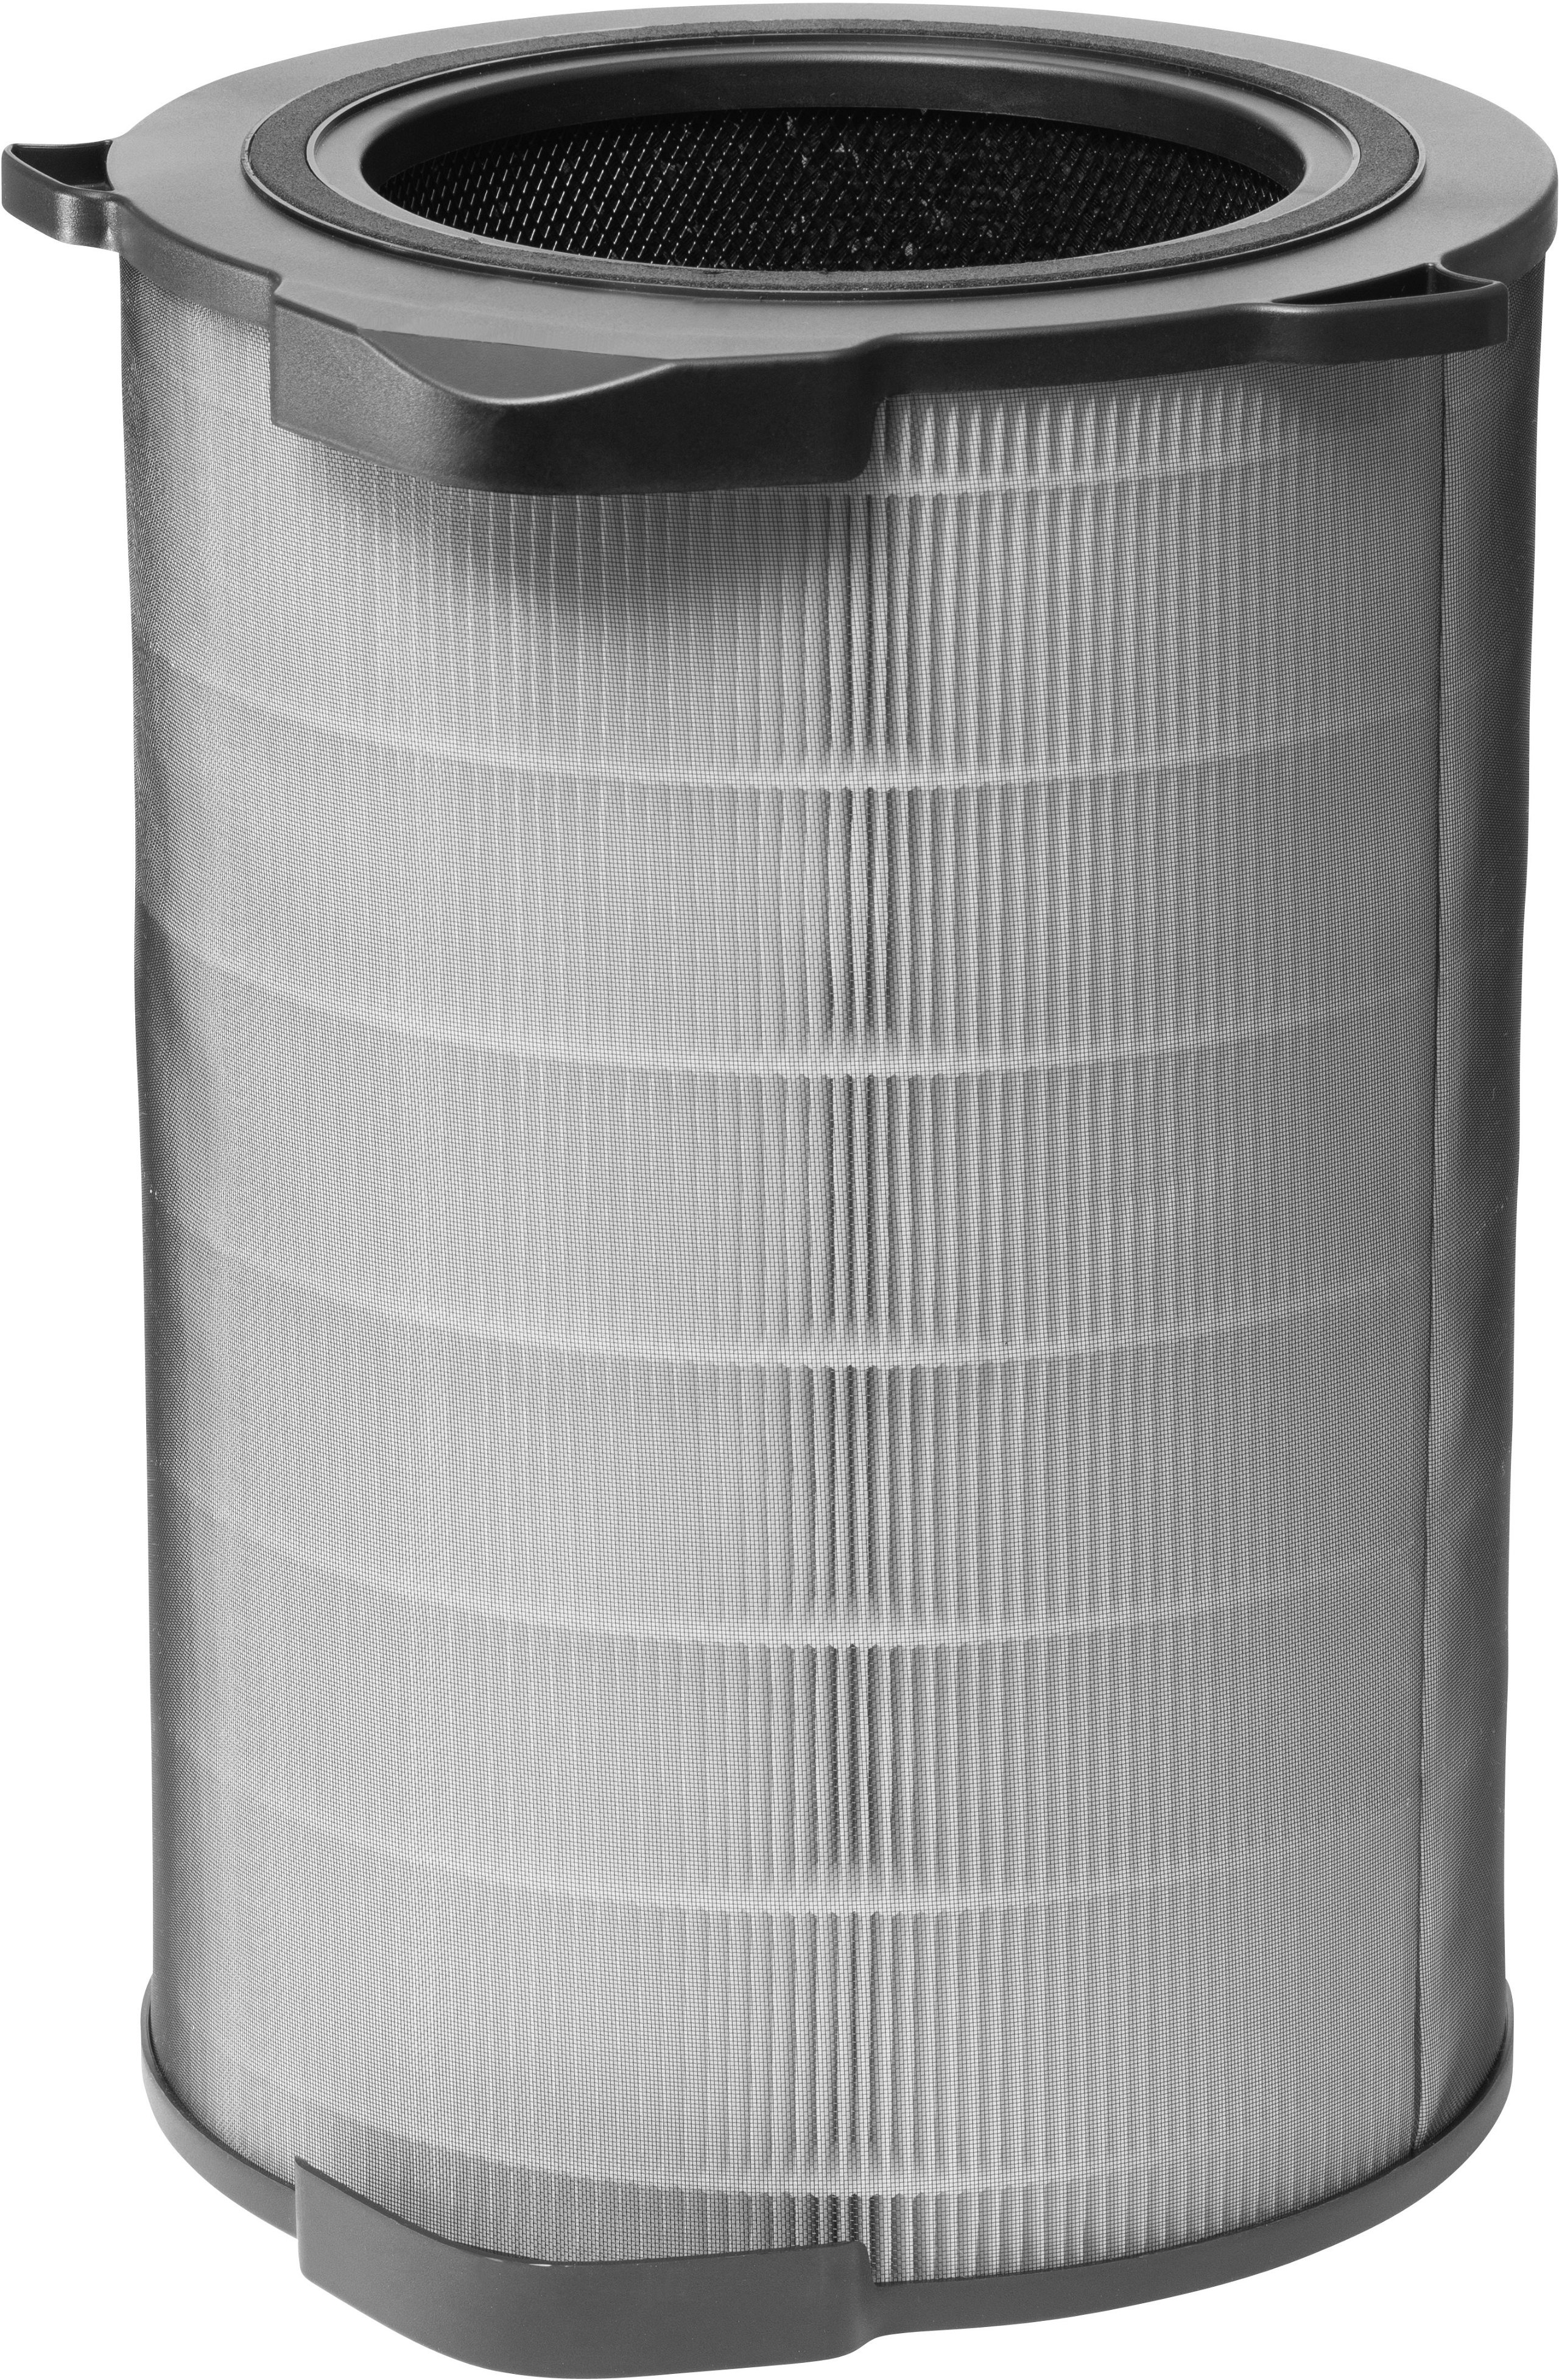 Filter for PA91-604GY - Air Purifier Filter | alza.hu